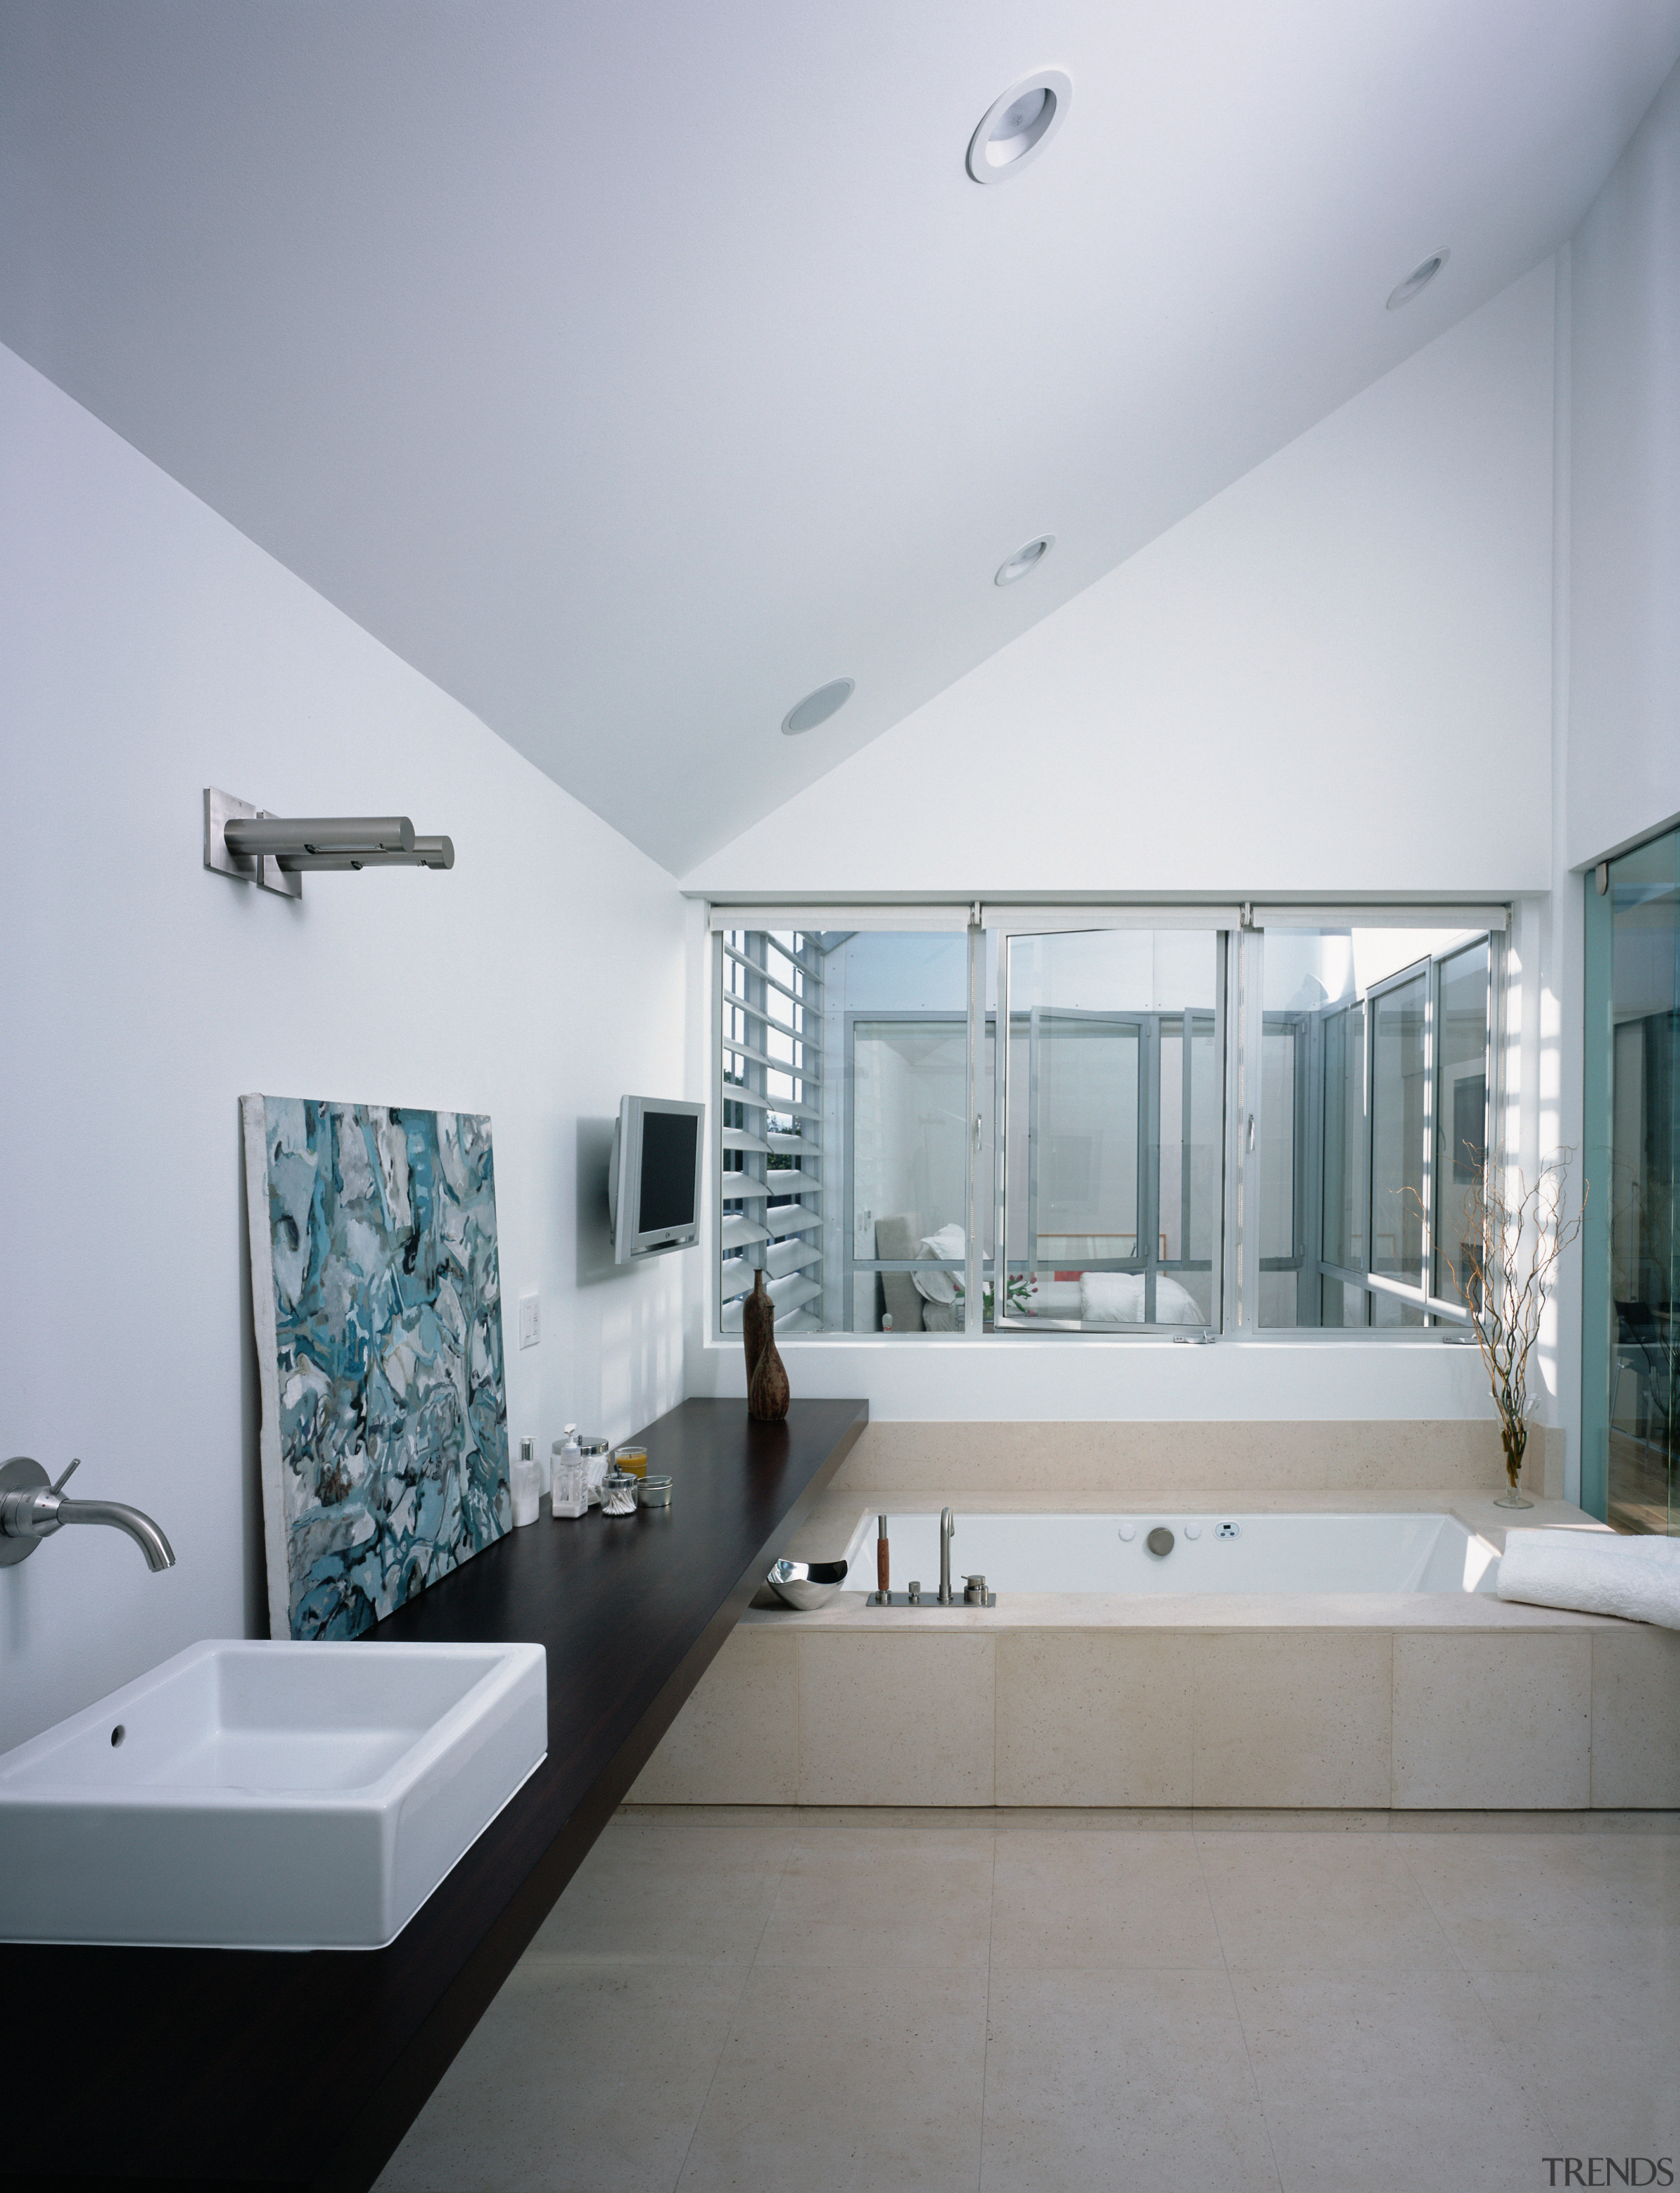 A view of the bathroom featuring recessed bathtub, architecture, bathroom, ceiling, daylighting, estate, home, interior design, real estate, room, window, gray